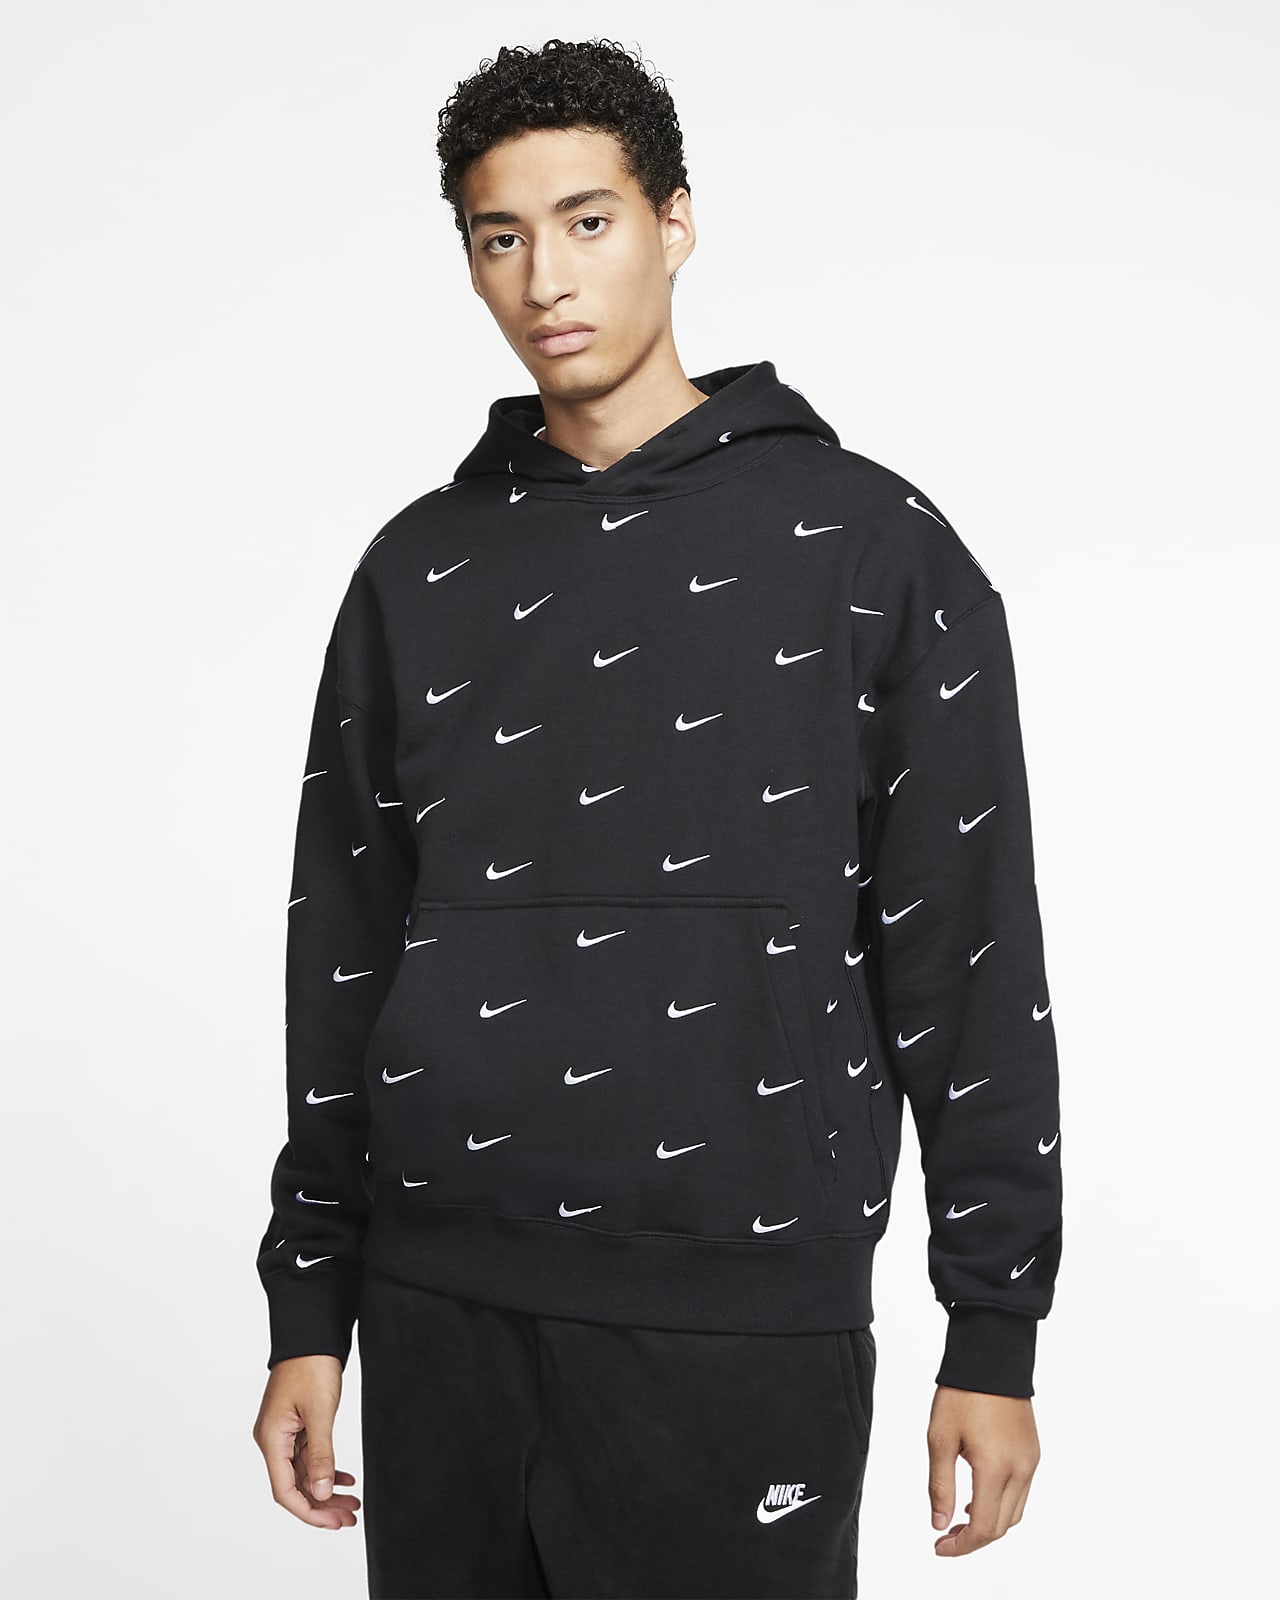 white nike hoodie with black swoosh all over